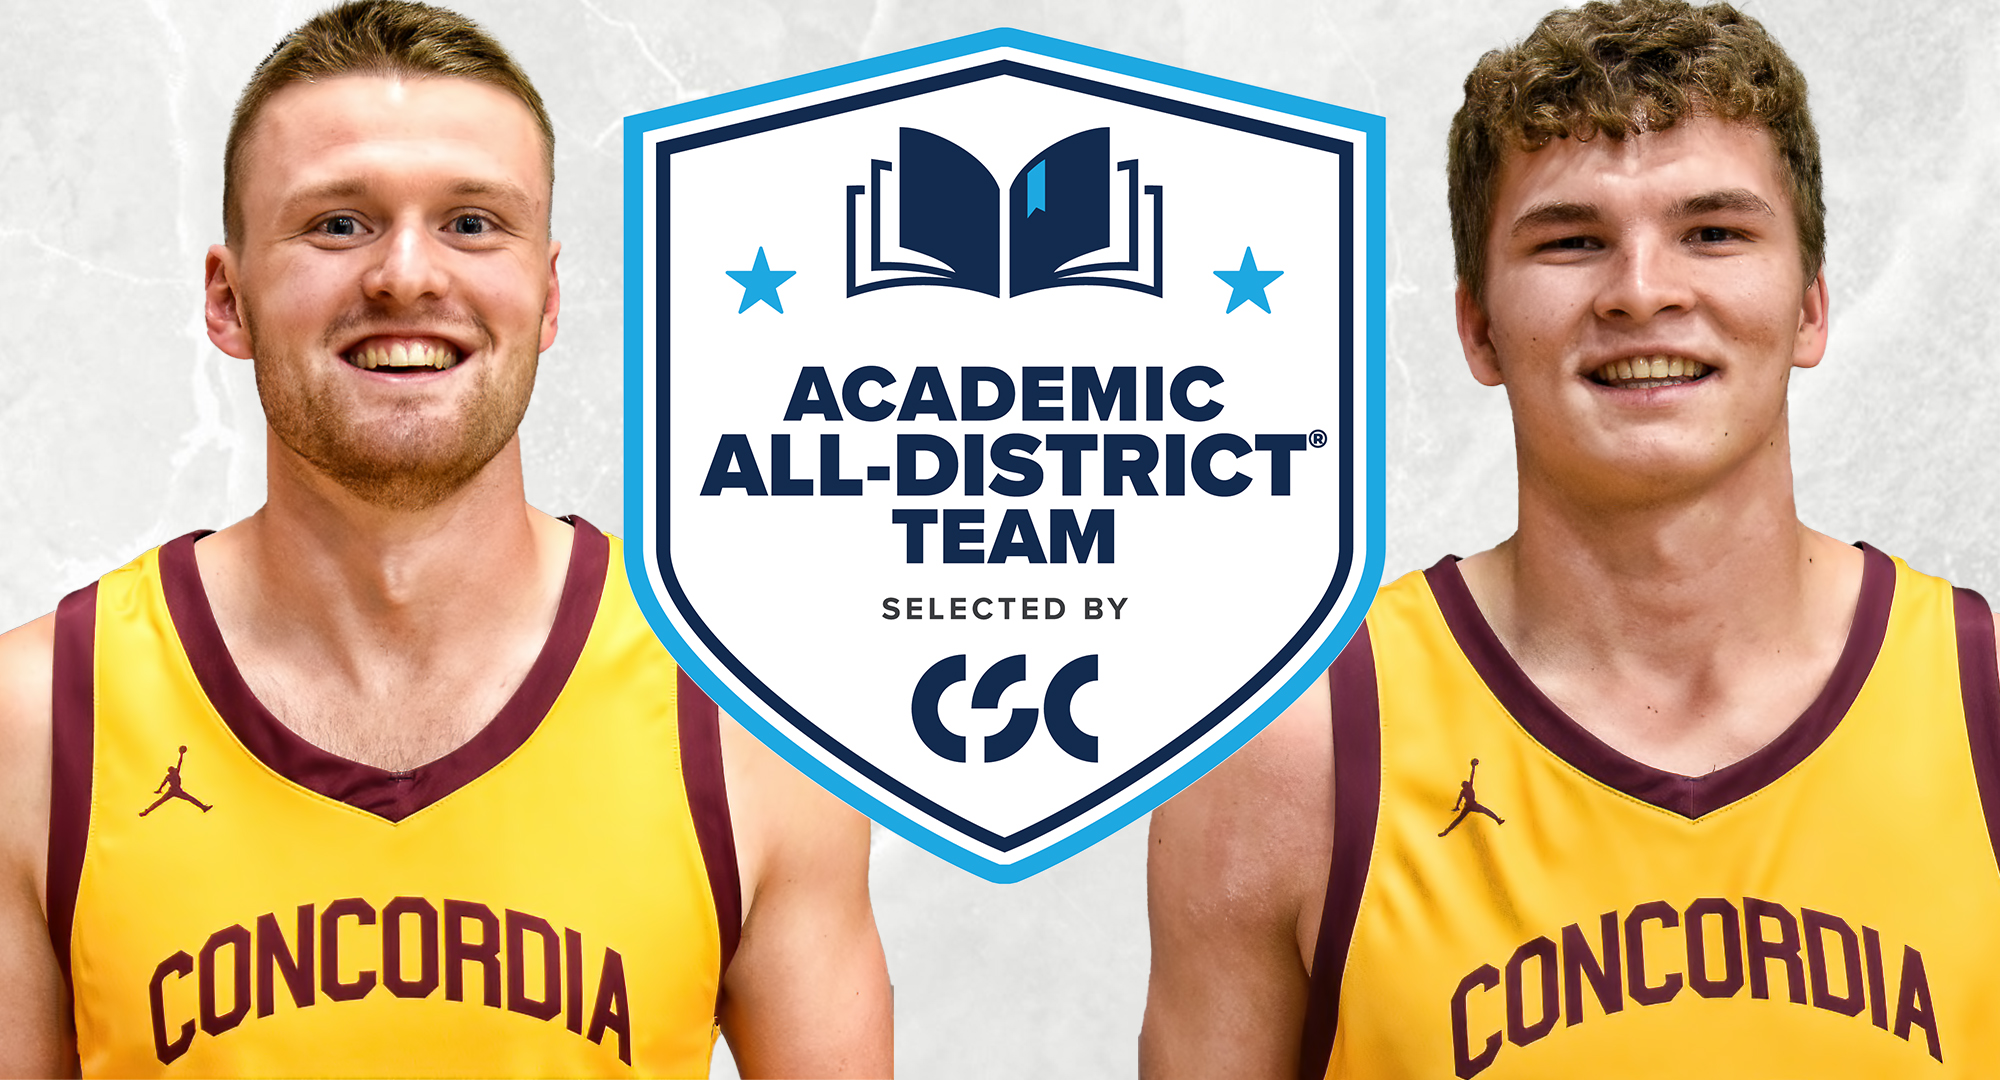 MIAC All-Conference honorees Matt Johnson and Rowan Nelson were named to the CSC Academic All-District Team.&nbsp;&nbsp;